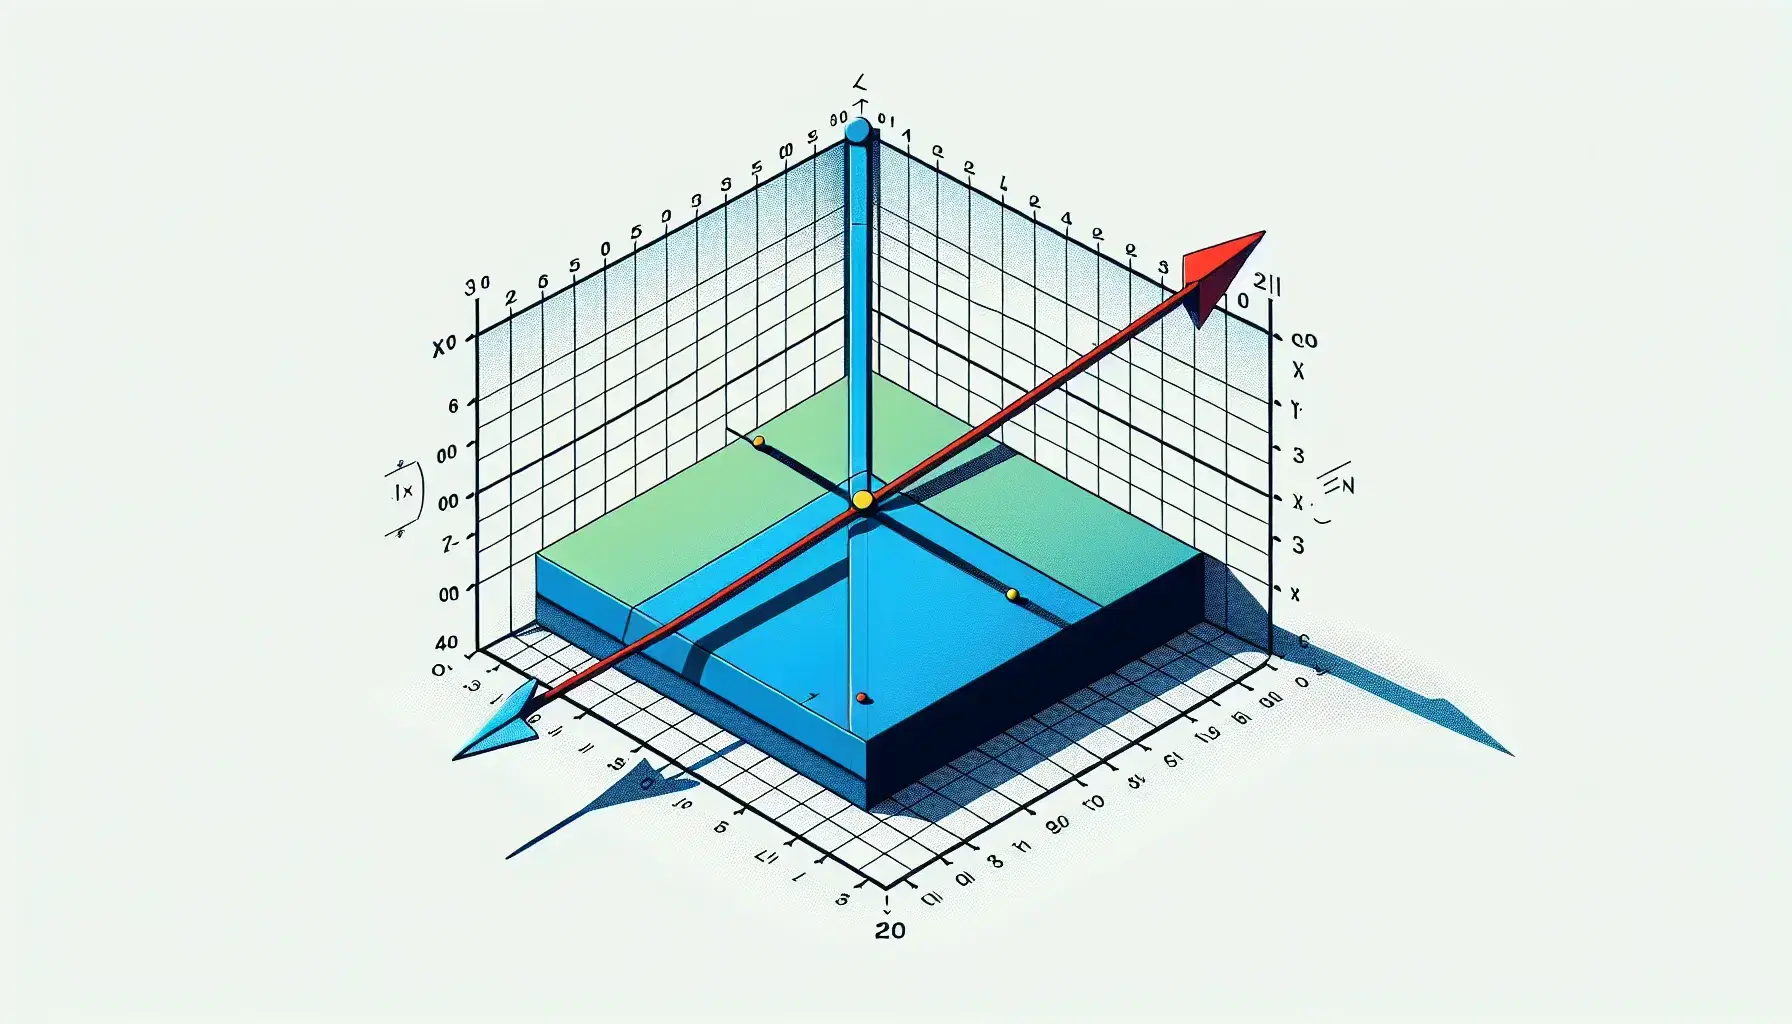 3D coordinate system with a blue vector extending from the origin, its red perpendicular projection onto a green plane, and intersection marked by a yellow dot.